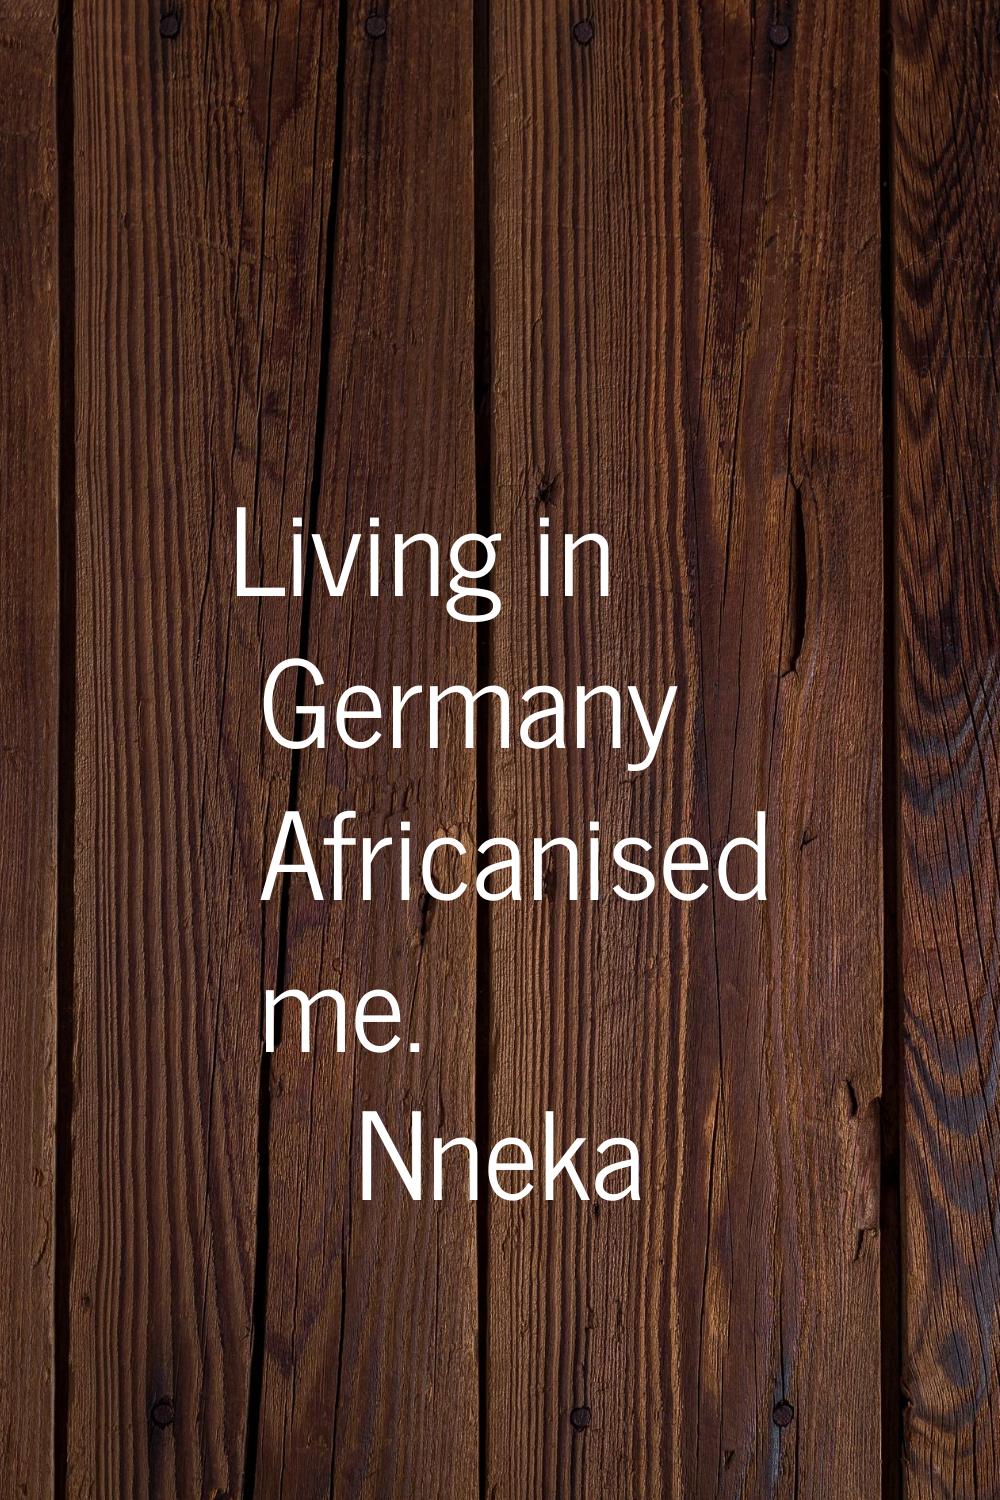 Living in Germany Africanised me.